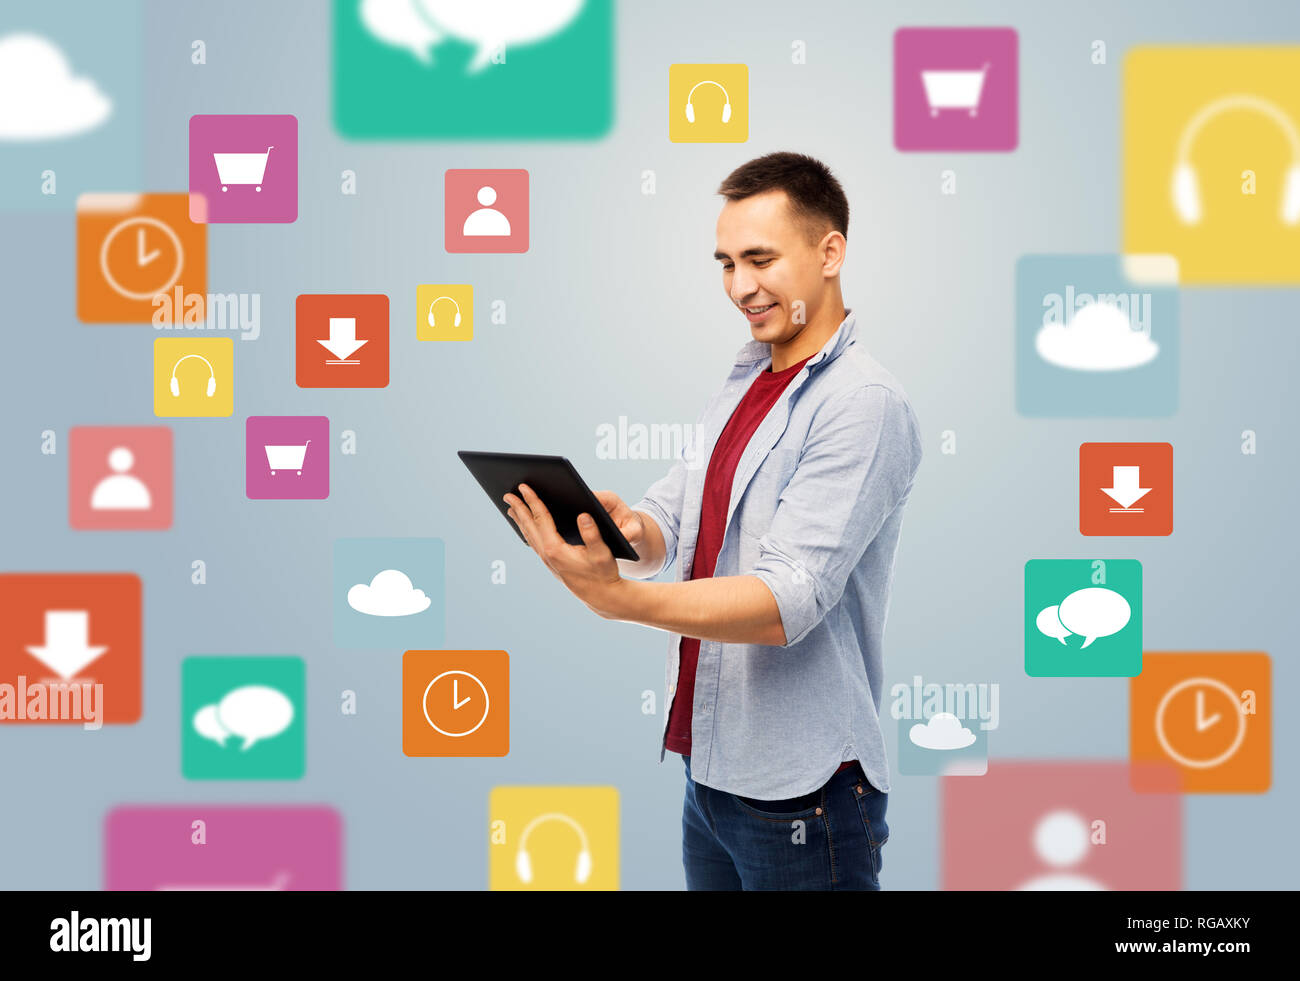 happy young man with tablet over media icons Stock Photo